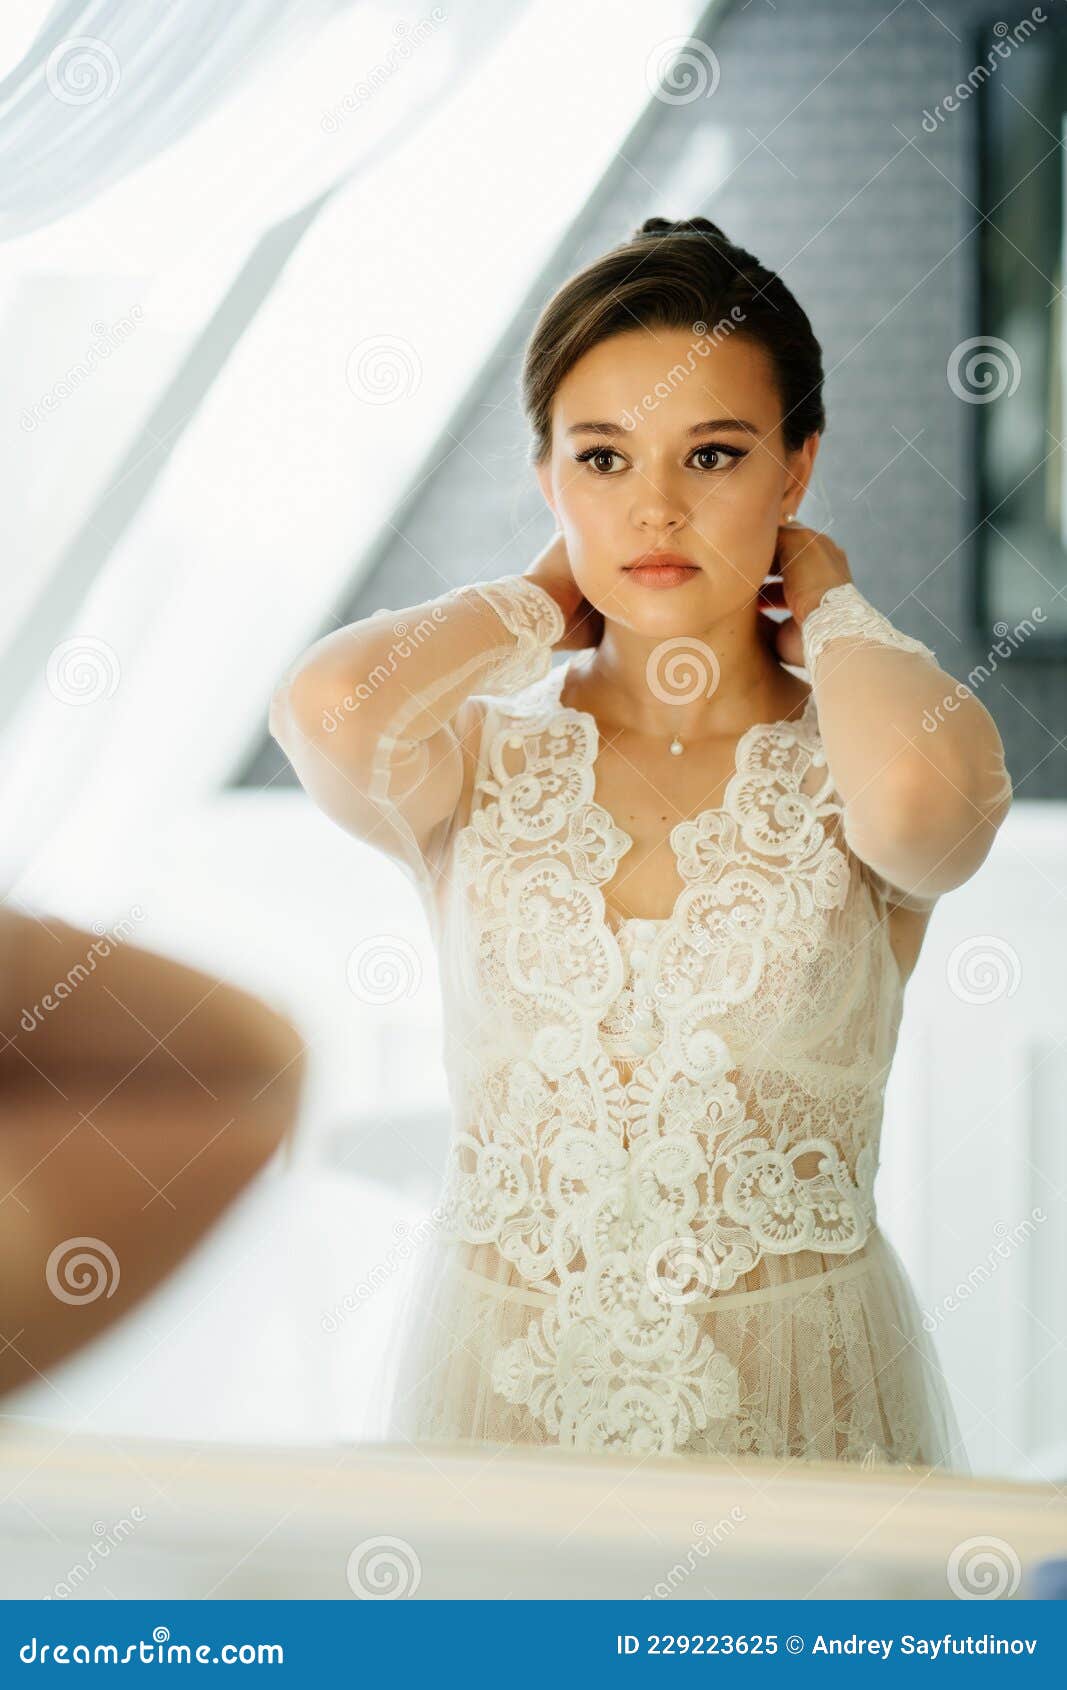 A Beautiful Young Woman in a Lace Robe by the Mirror Stock Image